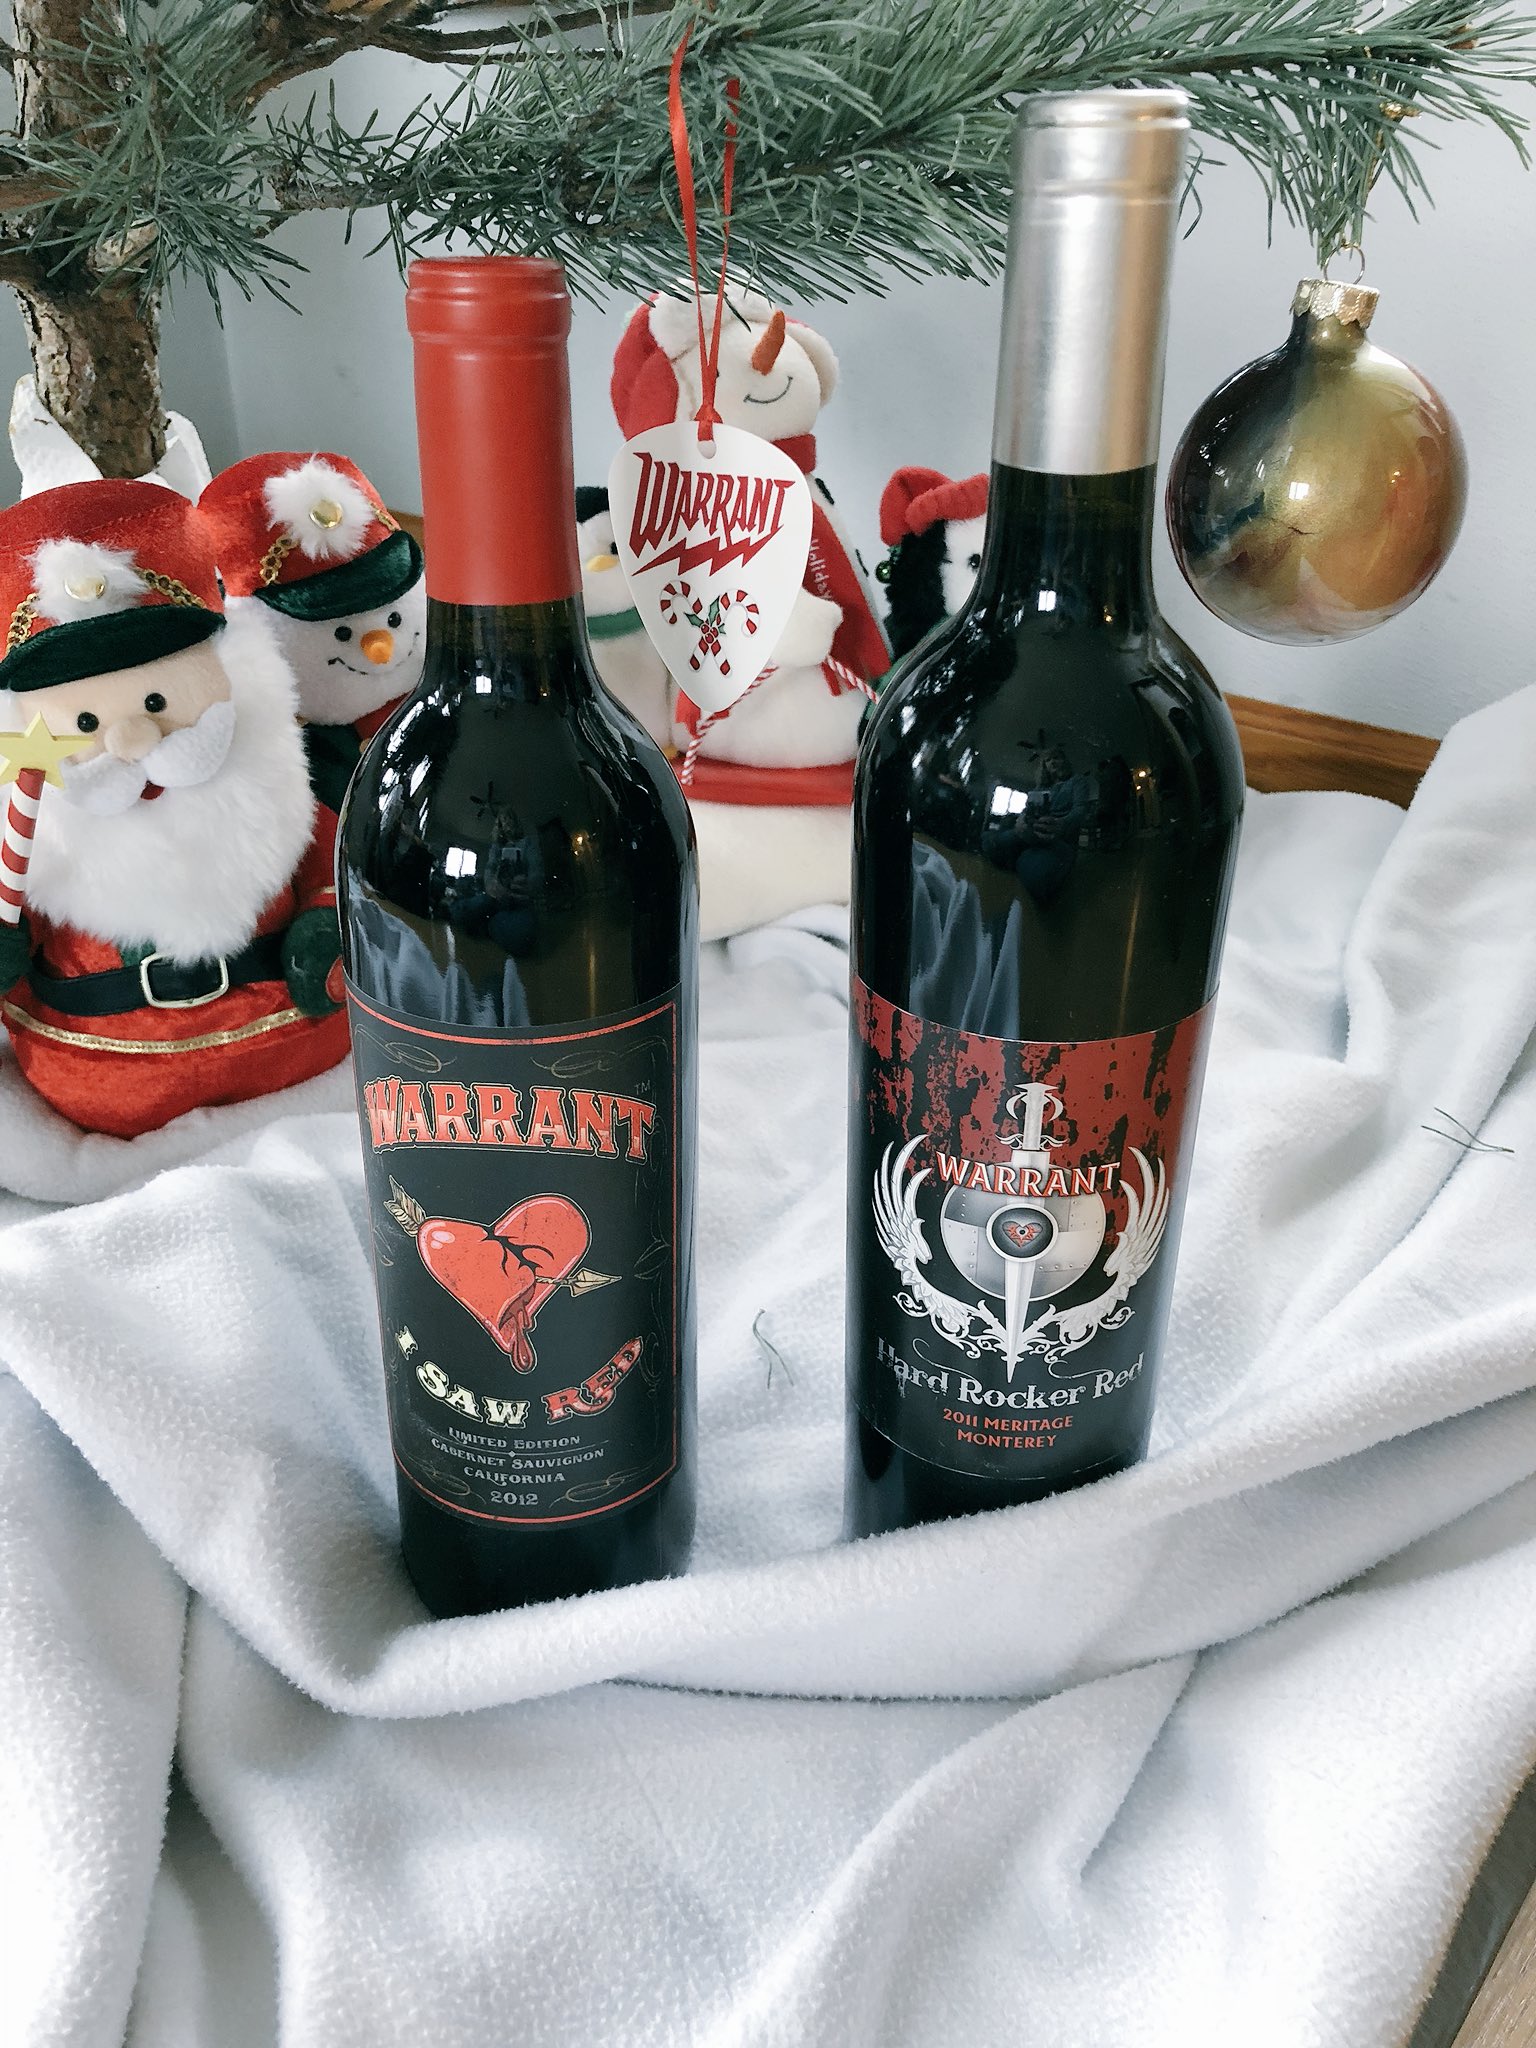 krysti farnam on Twitter: "Merry Christmas to me! Erik Turner @warrantrocks has a line of wines thru #southcoastwinery that I've wanted to try so I bought myself a gift! #isawred #rockerred 🎀💖